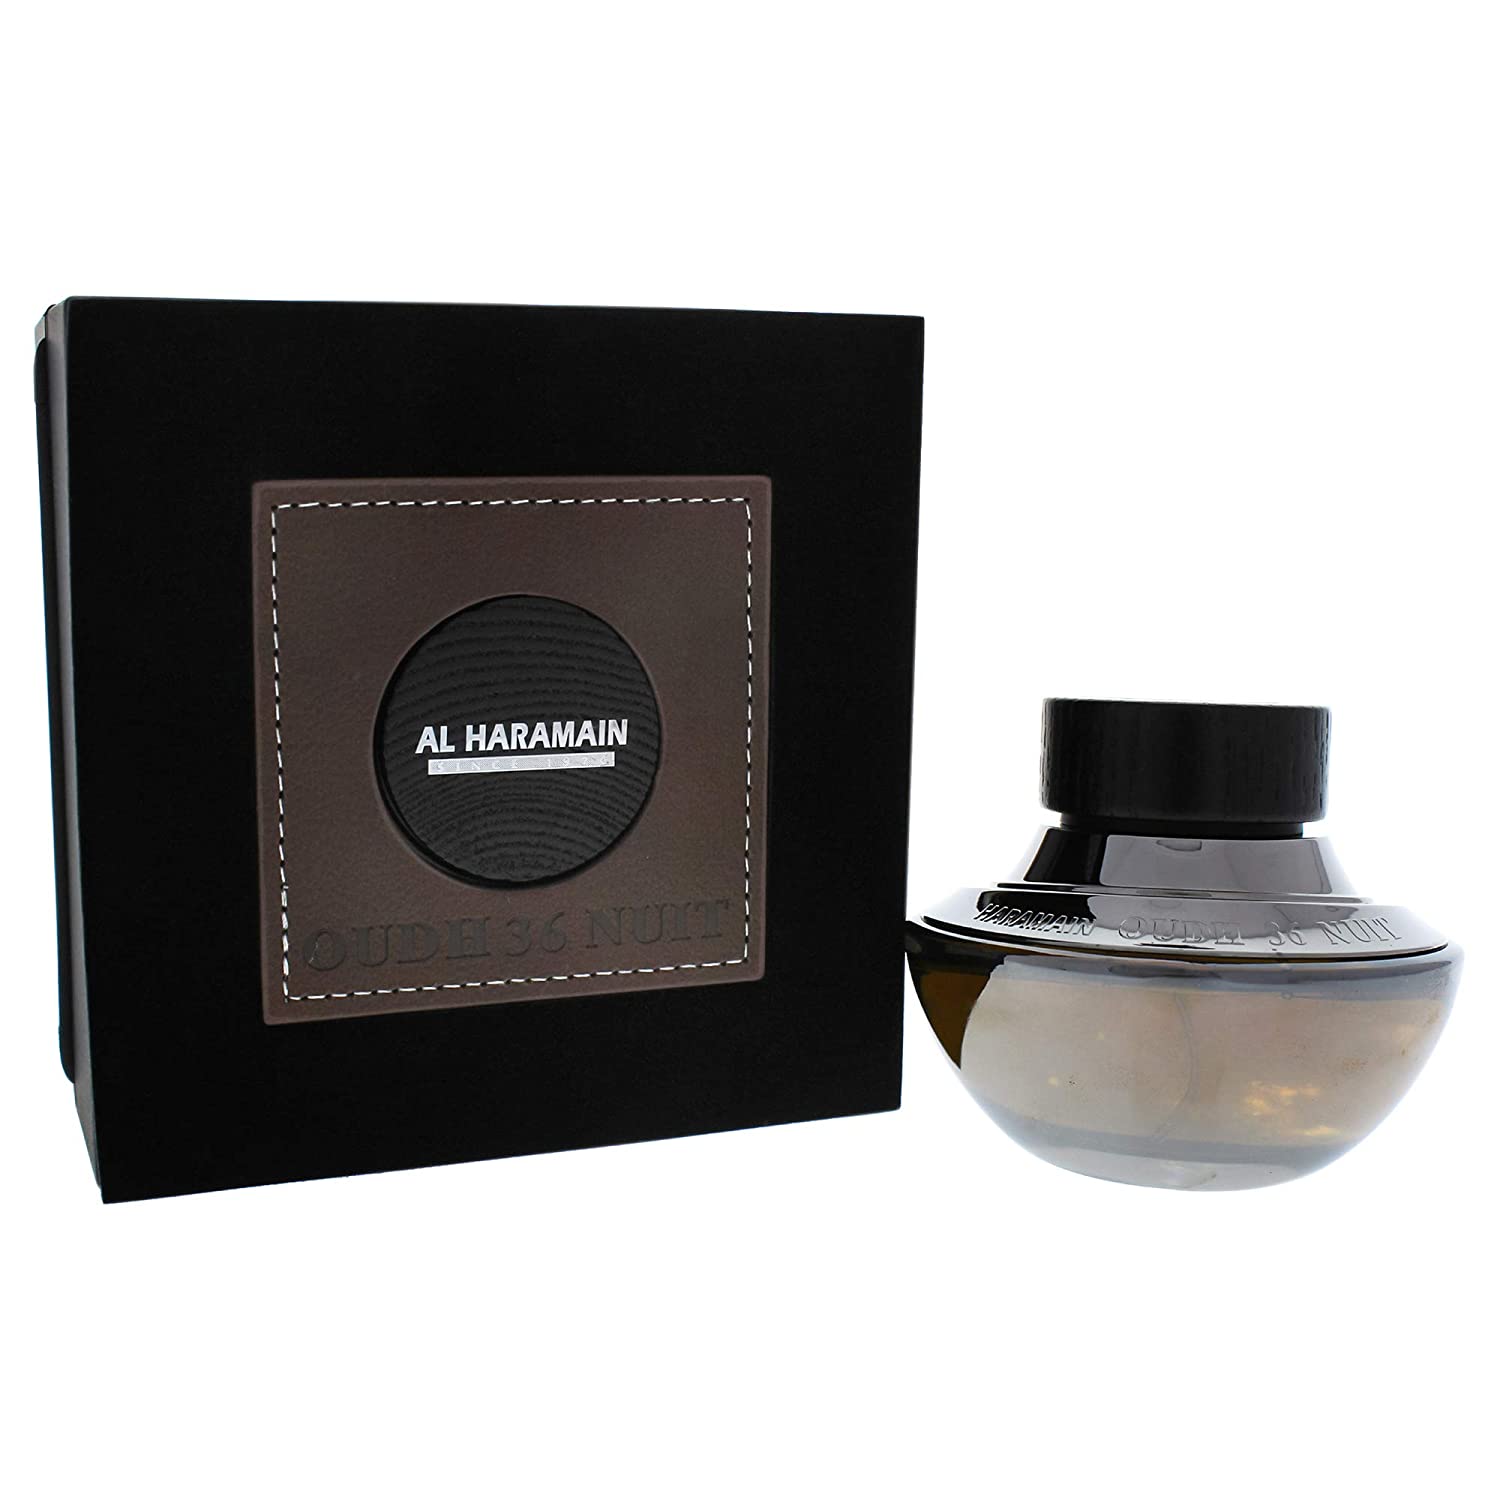 Oudh 36 Cologne by Al Haramain, Evoking the mystery and distinction of Arabian culture, Oudh 36 first hit shelves in 2016. This exciting, warm fragrance features top notes of geranium, cedar and cardamom. These earthy scents are balanced with heart notes of rose, saffron and agarwood or oud. Meanwhile, musk and labdanum provide a distinct foundation to this unisex fragrance. The exotic nature of this cologne makes it perfect for unique occasions, such as an opera or opening. Nonetheless, the versatility and subtlety of this fragrance allow men or women to wear it every day.